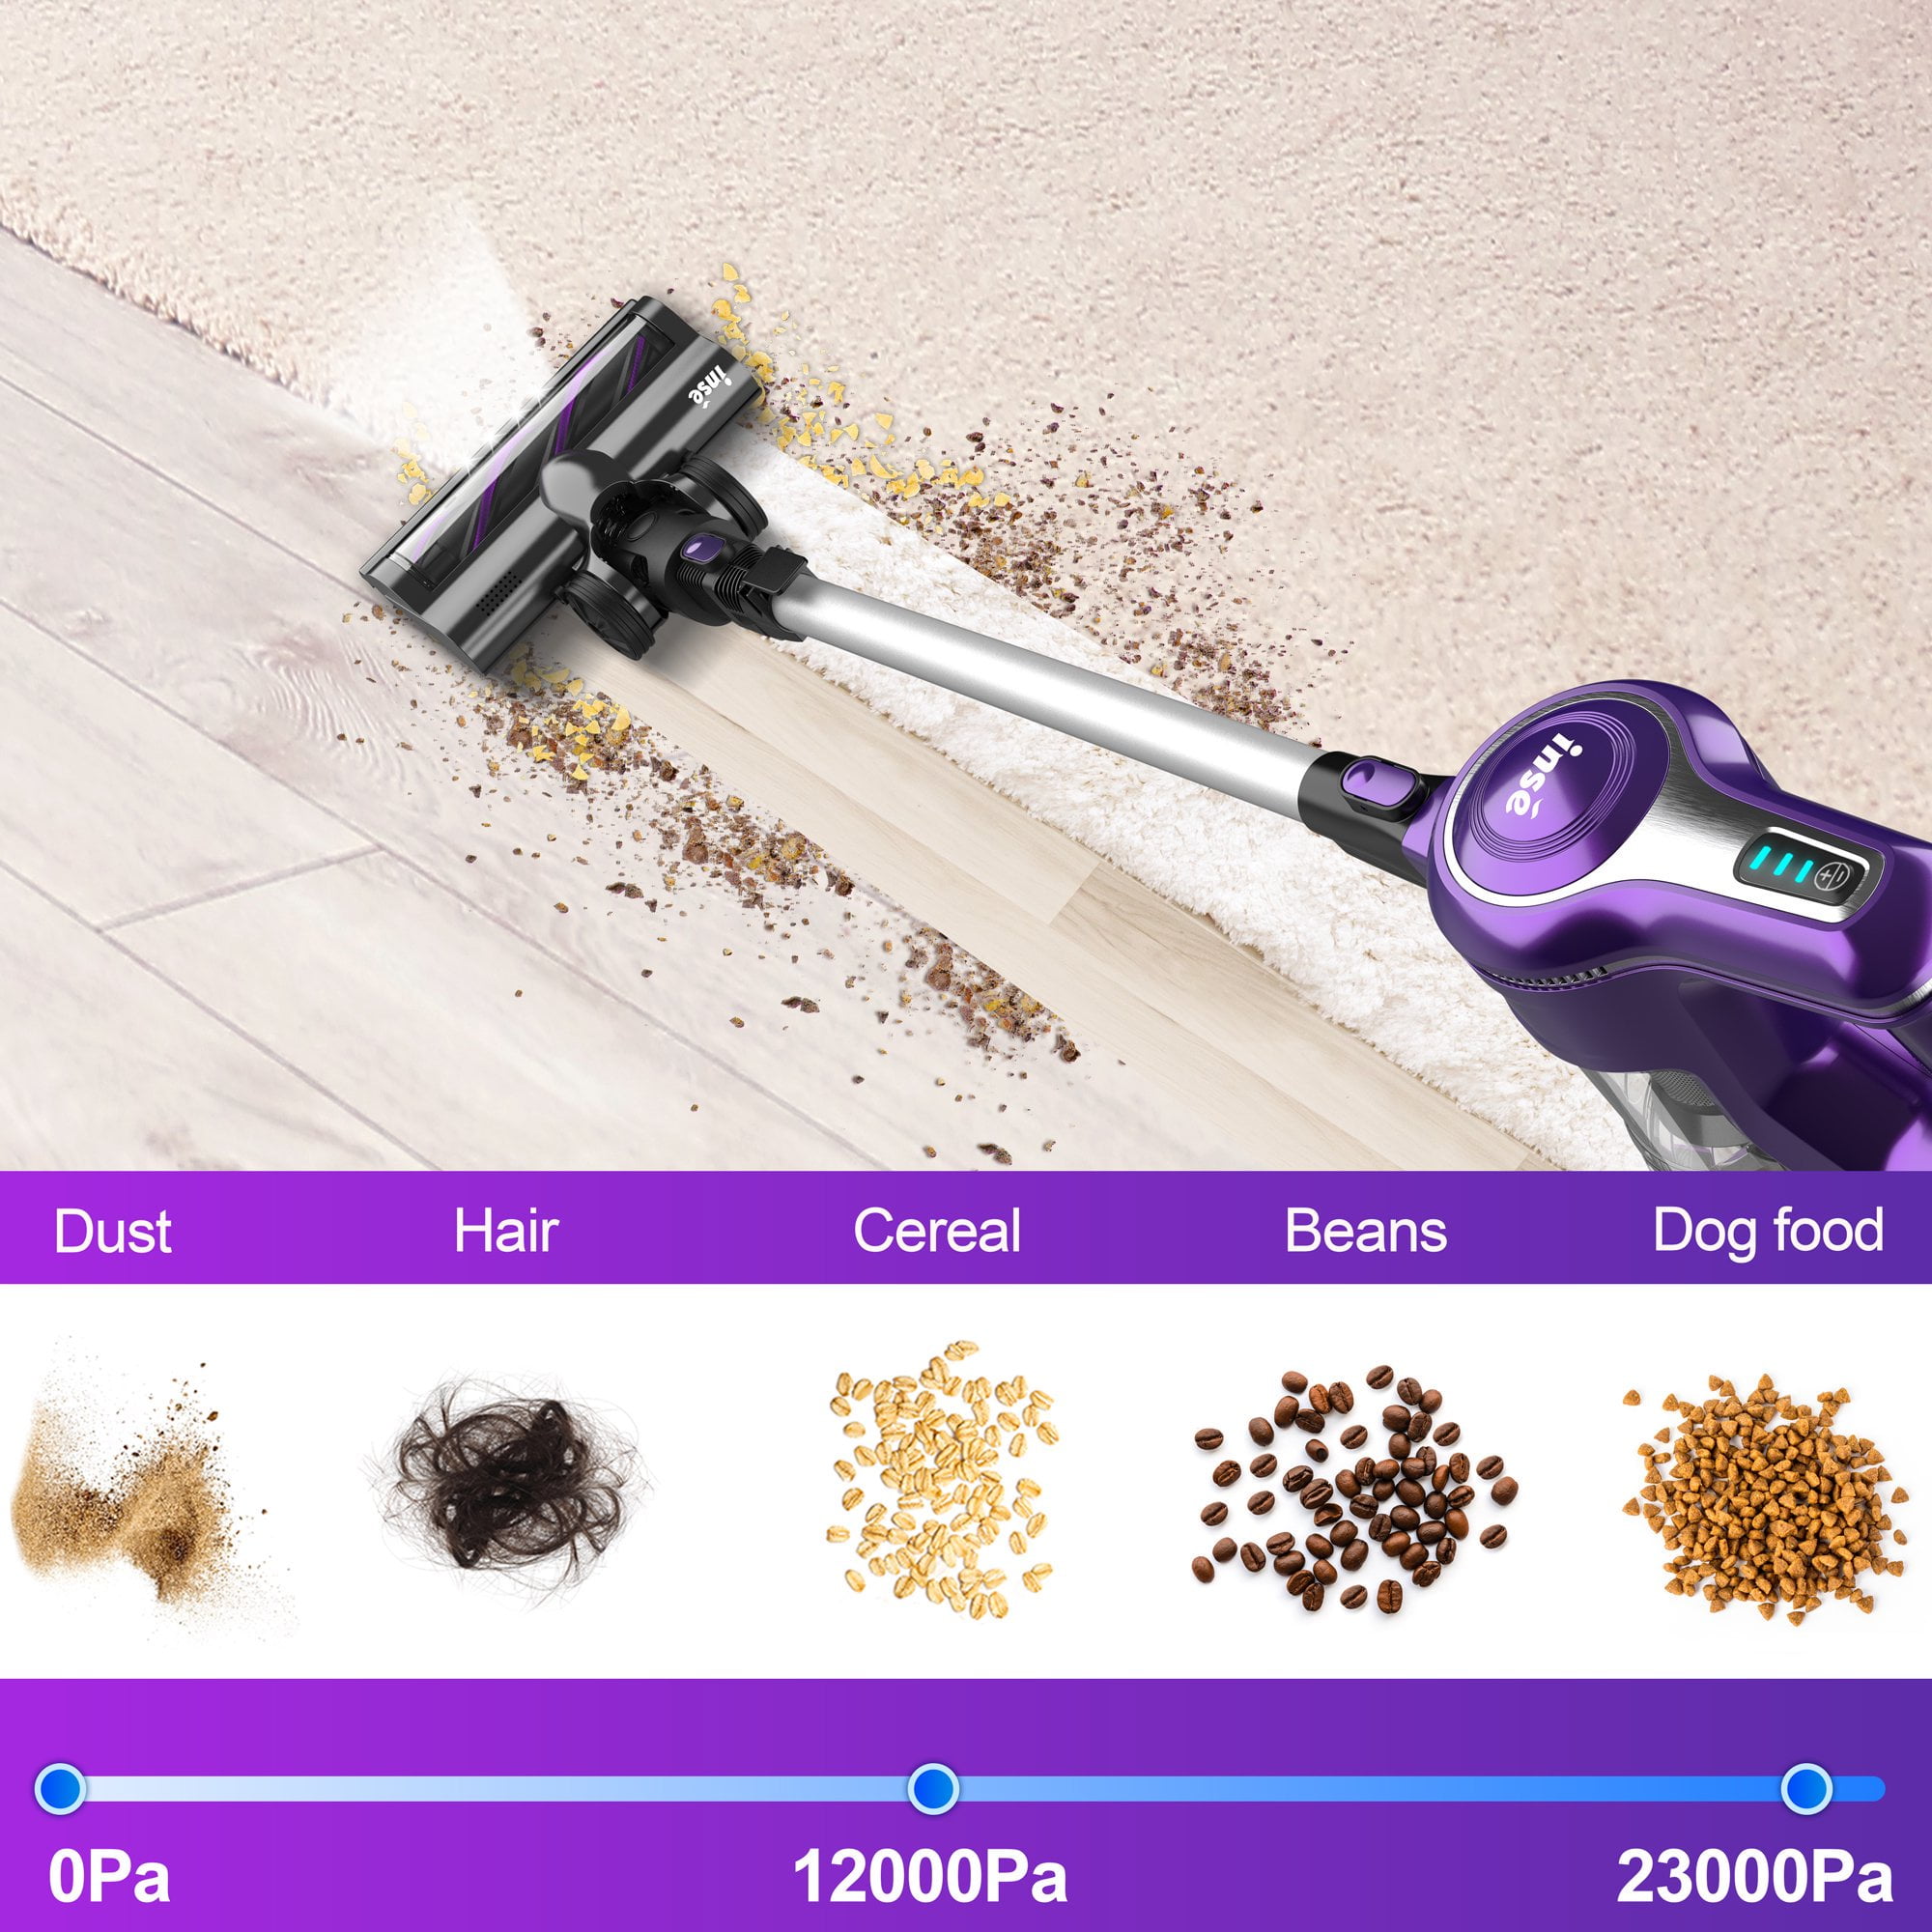 INSE Cordless Vacuum Cleaner, 23Kpa 250W Brushless Motor Stick Vacuum, 10-in-1 Lightweight Handheld for Cleaning - Purple - 1